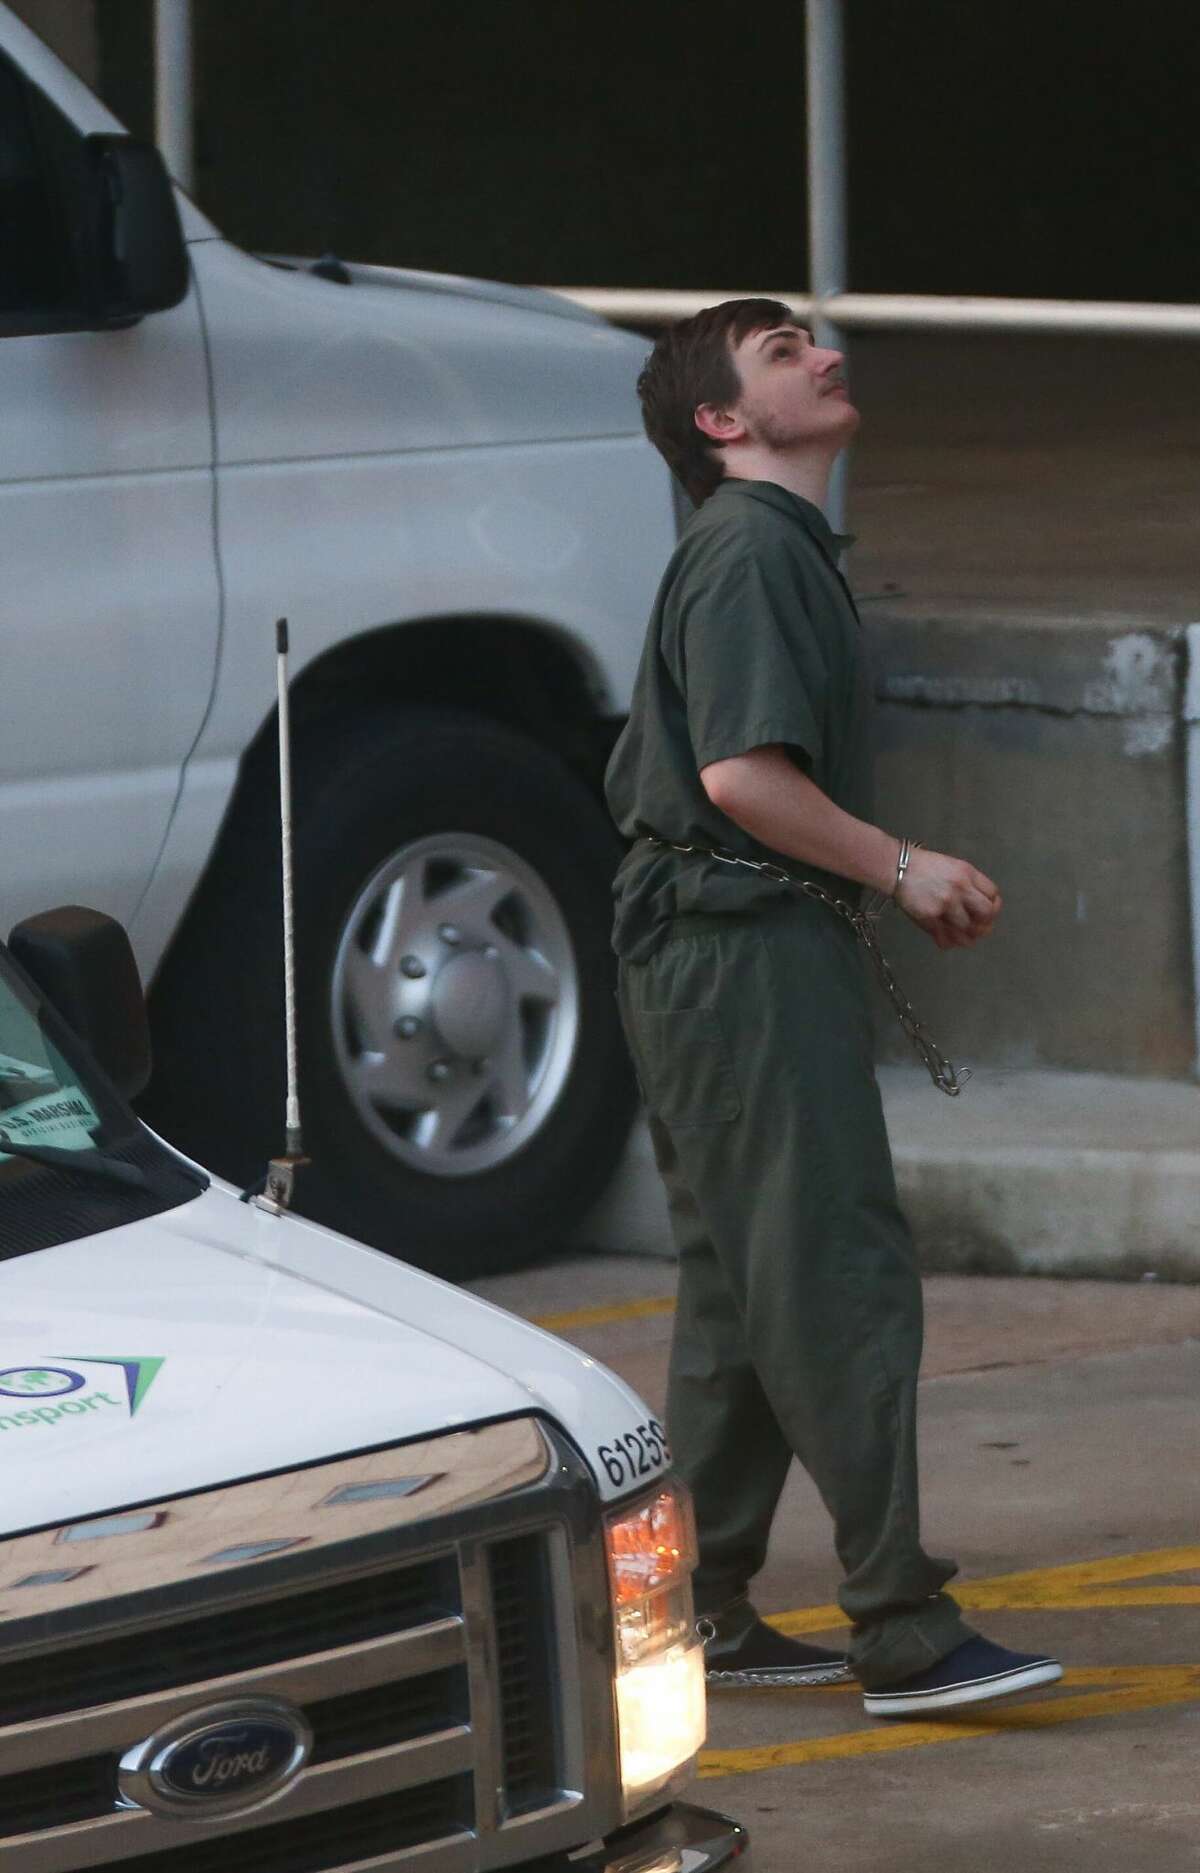 Andrew Cecil Schneck, who is being accused of trying to bomb the statue of a confederate officer in Hermann Park in August, arrives for the preliminary examination and detention hearing before U.S. Magistrate Judge Mary Milloy outside the United States District Courthouse Tuesday, Sept. 19, 2017, in Houston. ( Godofredo A. Vasquez / Houston Chronicle )